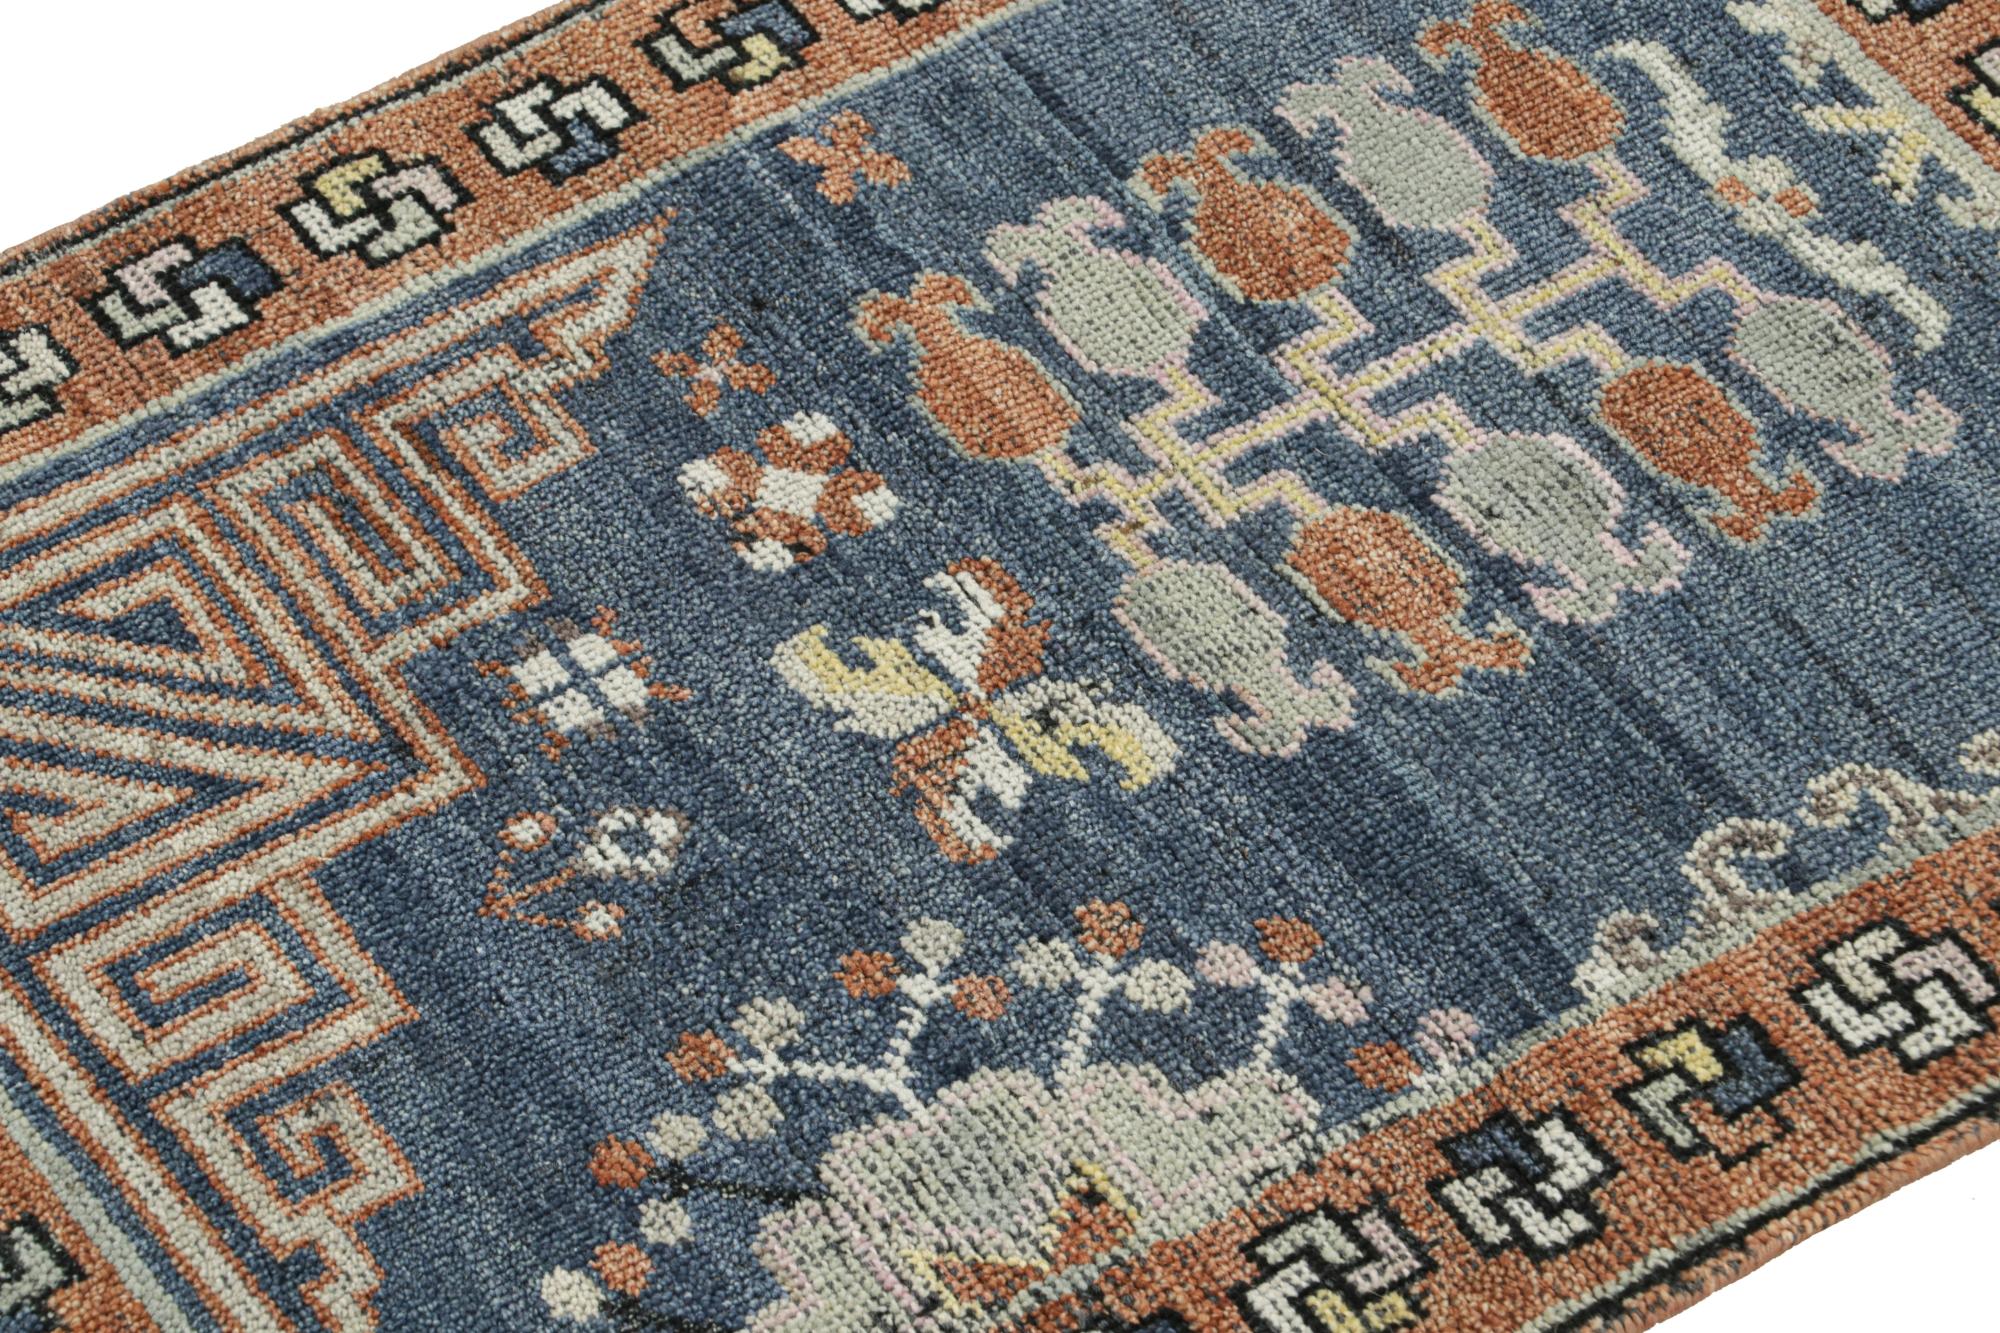 This 2x3 rug is a regal new entry to Rug & Kilim’s custom classics Burano collection. hand knotted in wool.

Further on the Design: 

This accent rug is a contemporary take on Khotan rugs, both shifting their scale and reimagining their colors